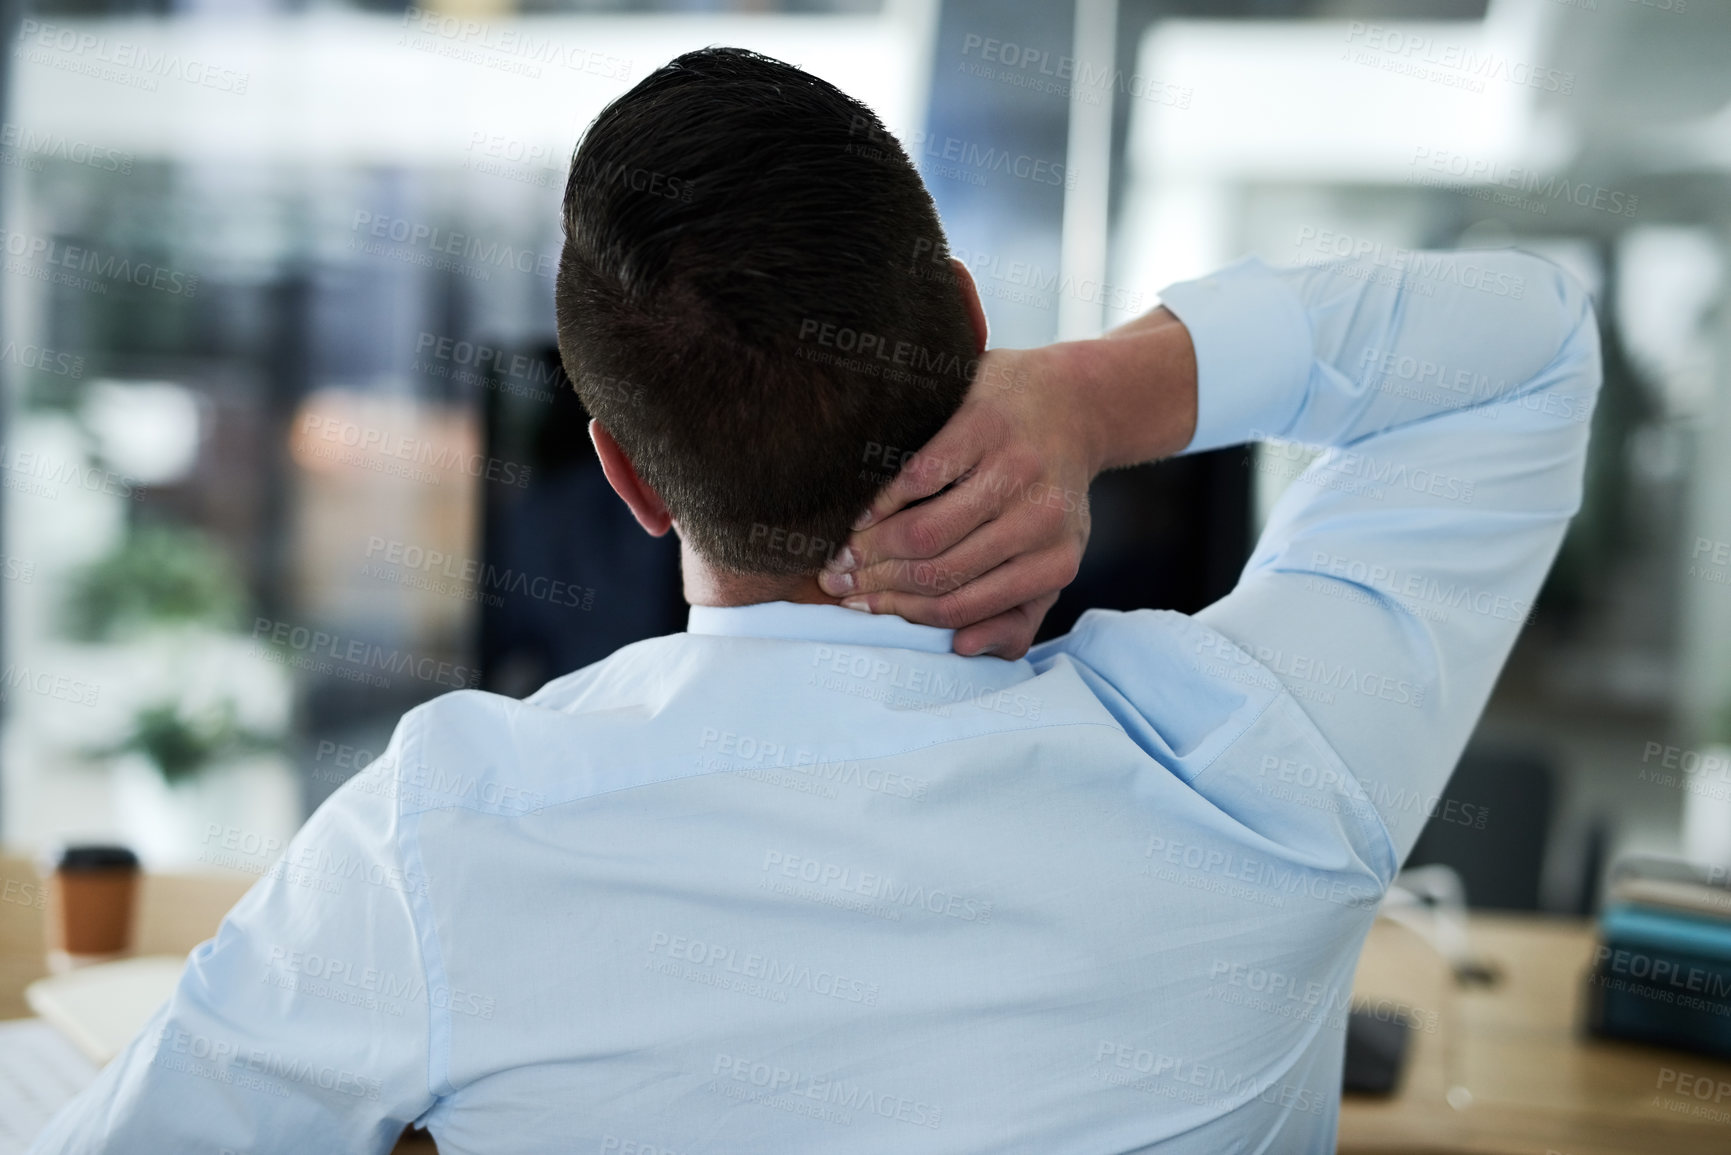 Buy stock photo Rearview shot of a young businessman experiencing neck pain while working in an office